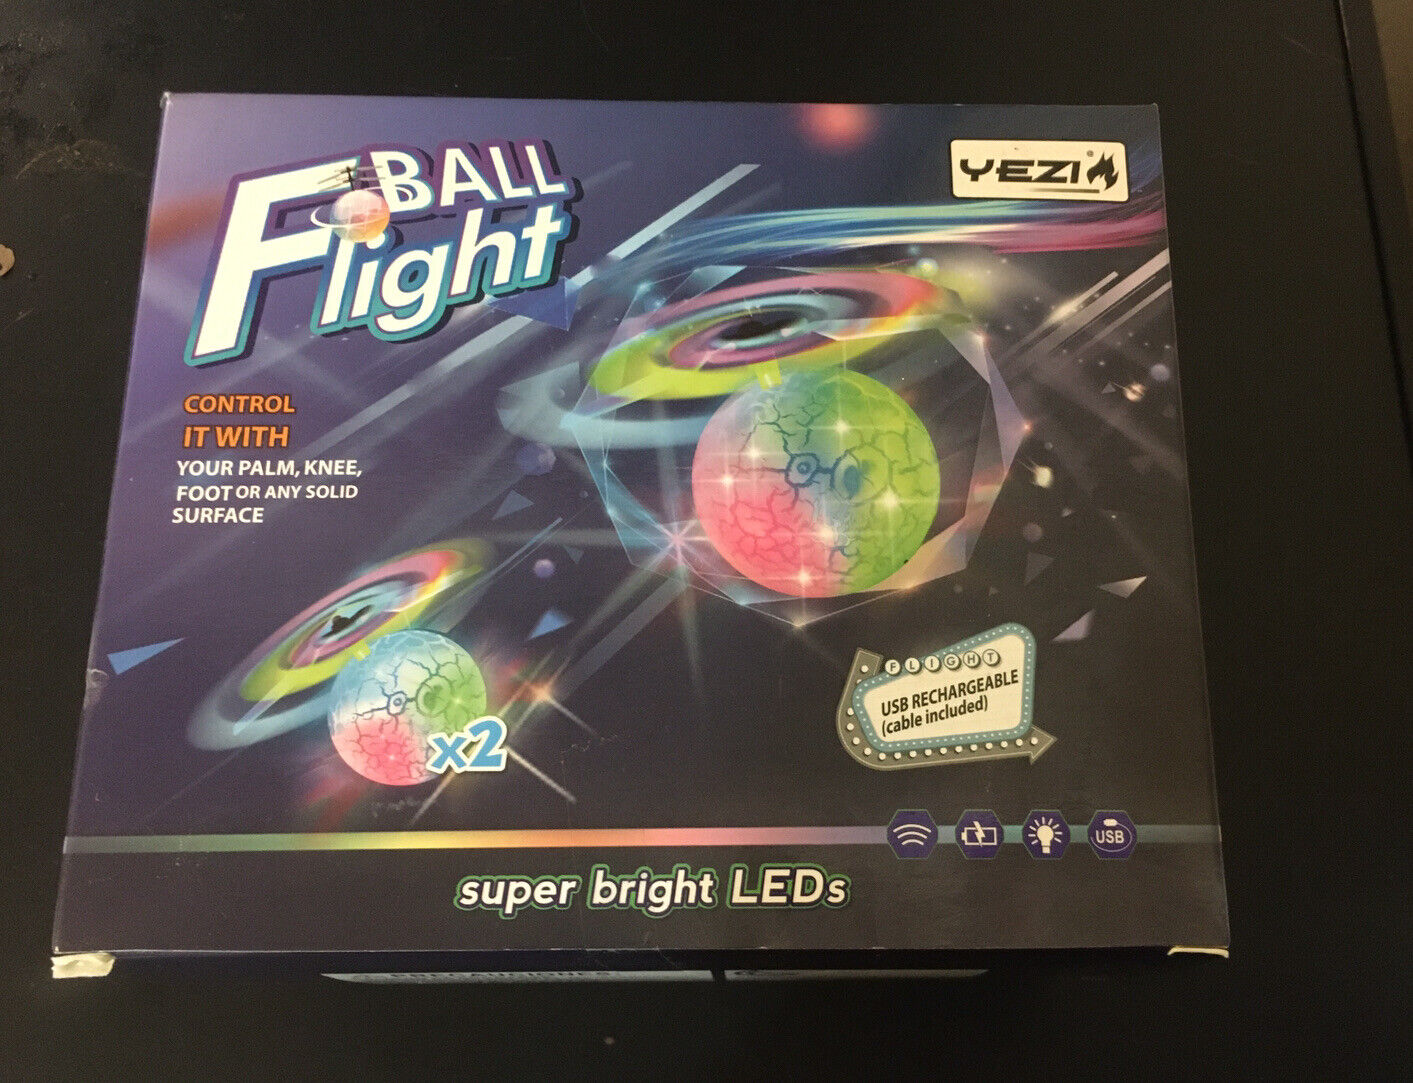 Yezia Ball Flight Control w/ Palm Or Foot  Bright LED’s USB Rechargeable New Yezia Does not apply - фотография #13